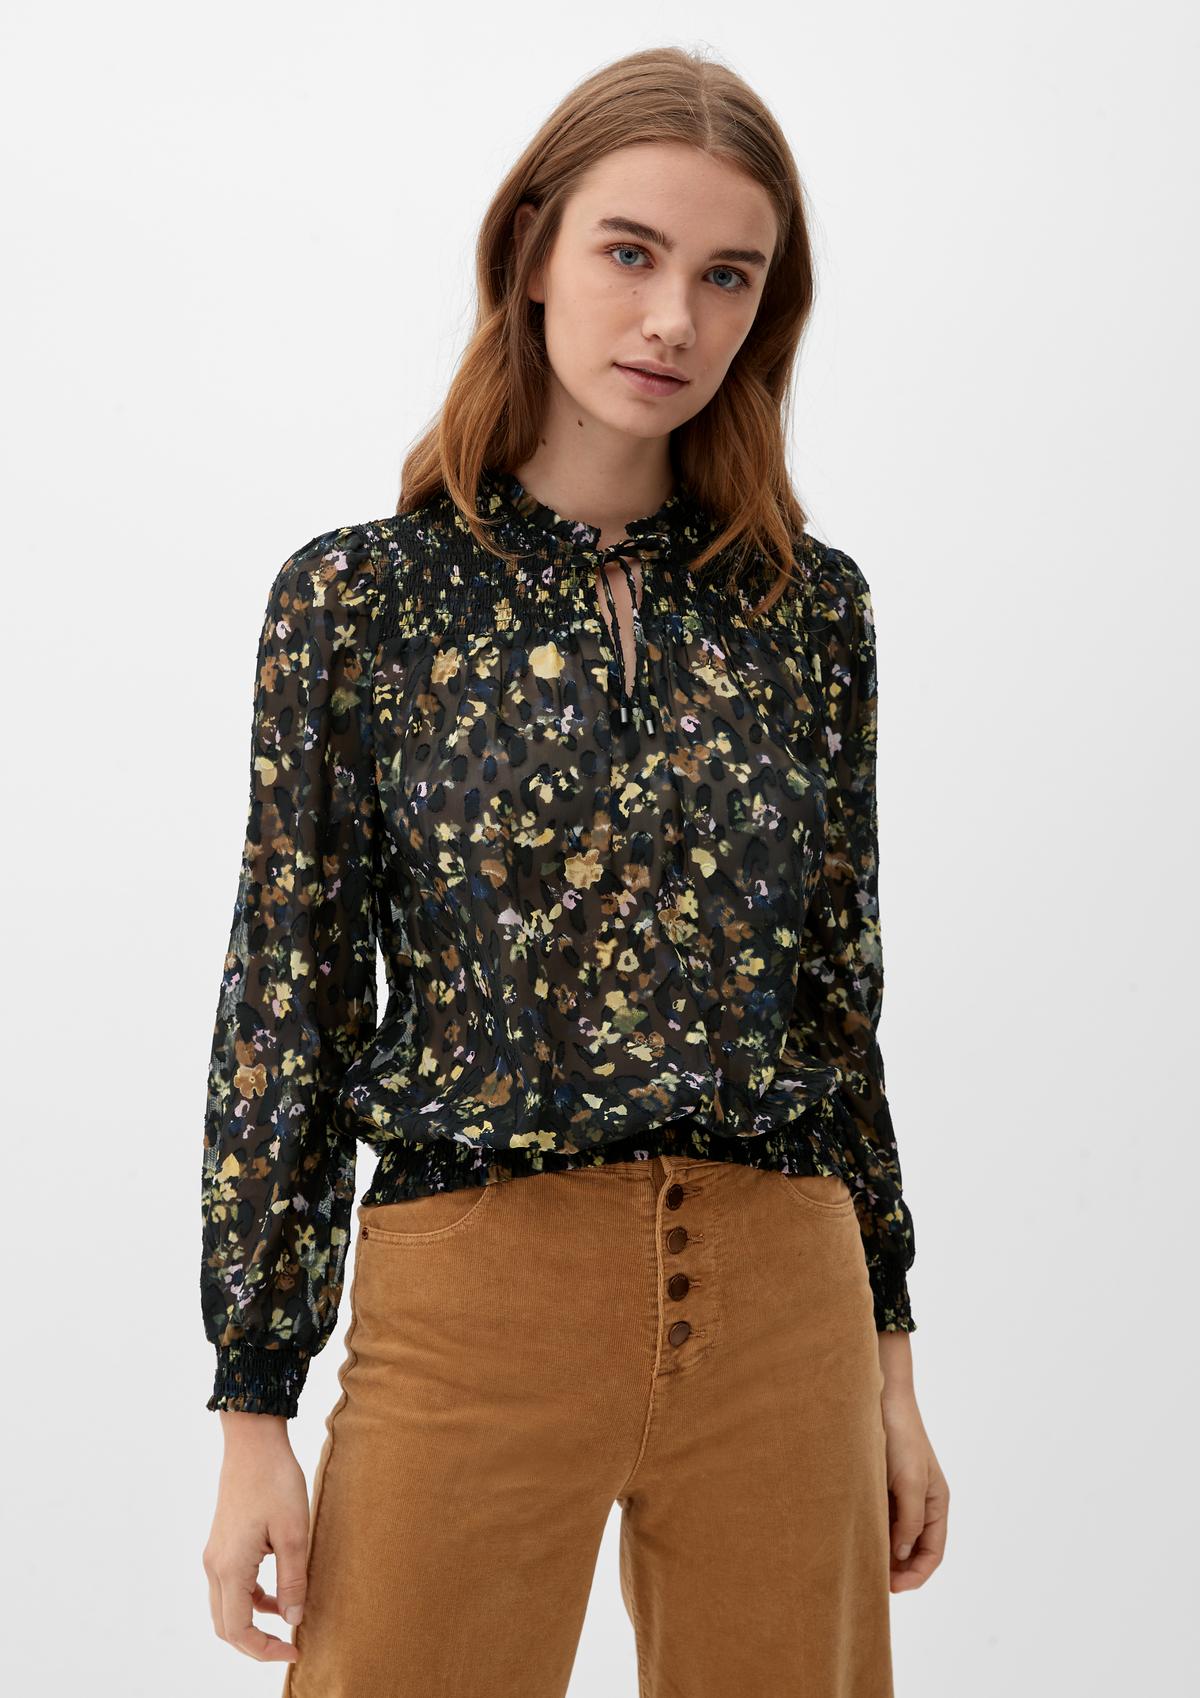 Sequin Detailed Chiffon Blouse by Witt